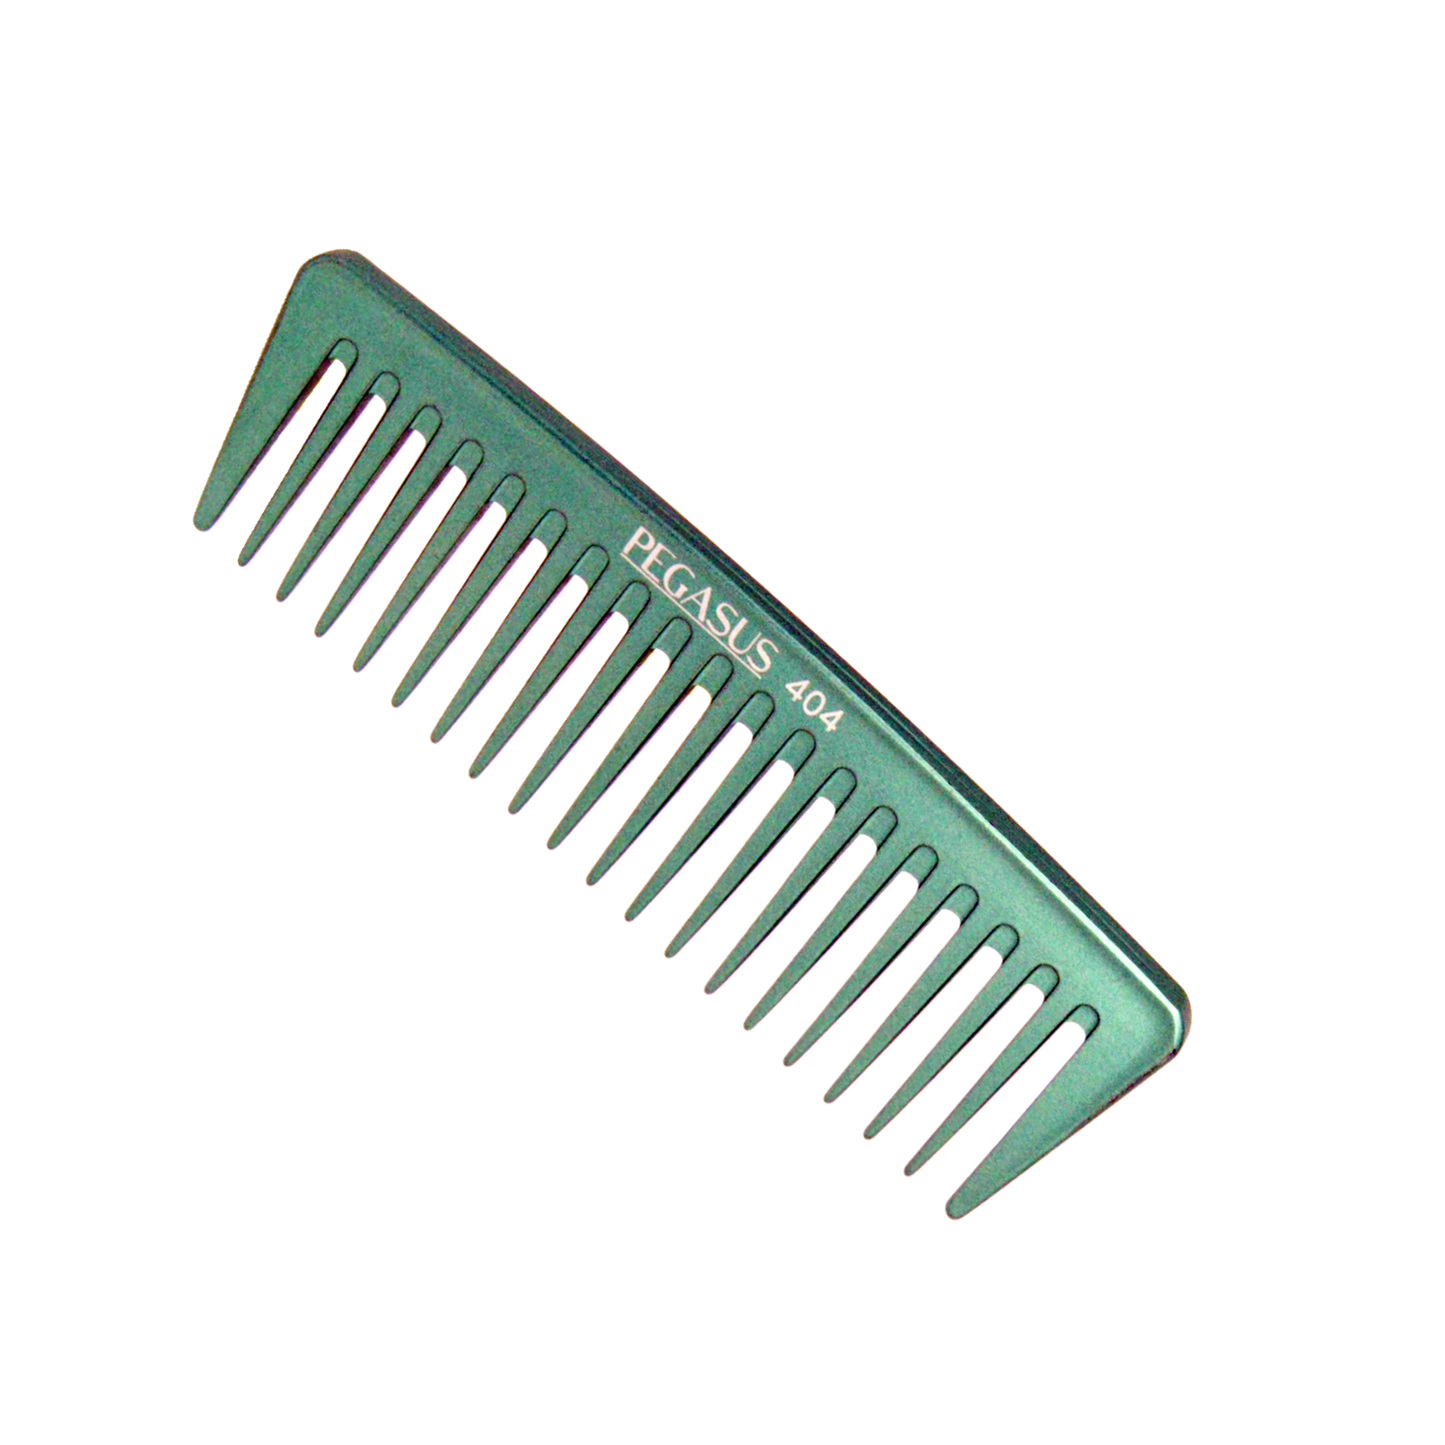 Pegasus MICOLOR 404, 7in Hard Rubber Wide Tooth Tall Styling Comb, Handmade, Seamless, Smooth Edges, Anti Static, Heat and Chemically Resistant, Wet Hair, Everyday Grooming Comb | Peines de goma dura - Green